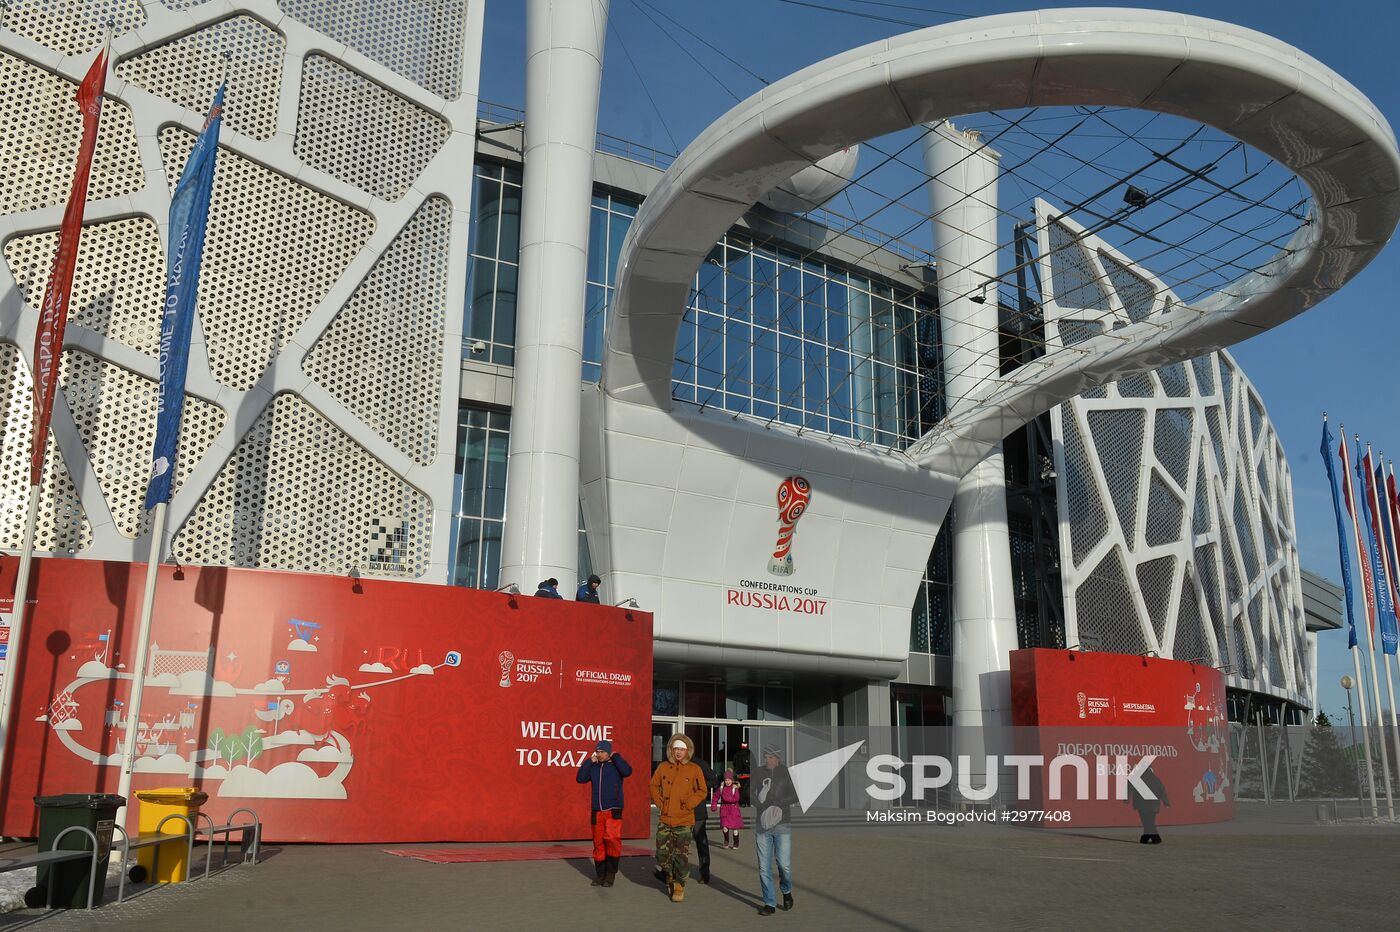 Preparations for 2017 FIFA Confederations Cup draw in Kazan